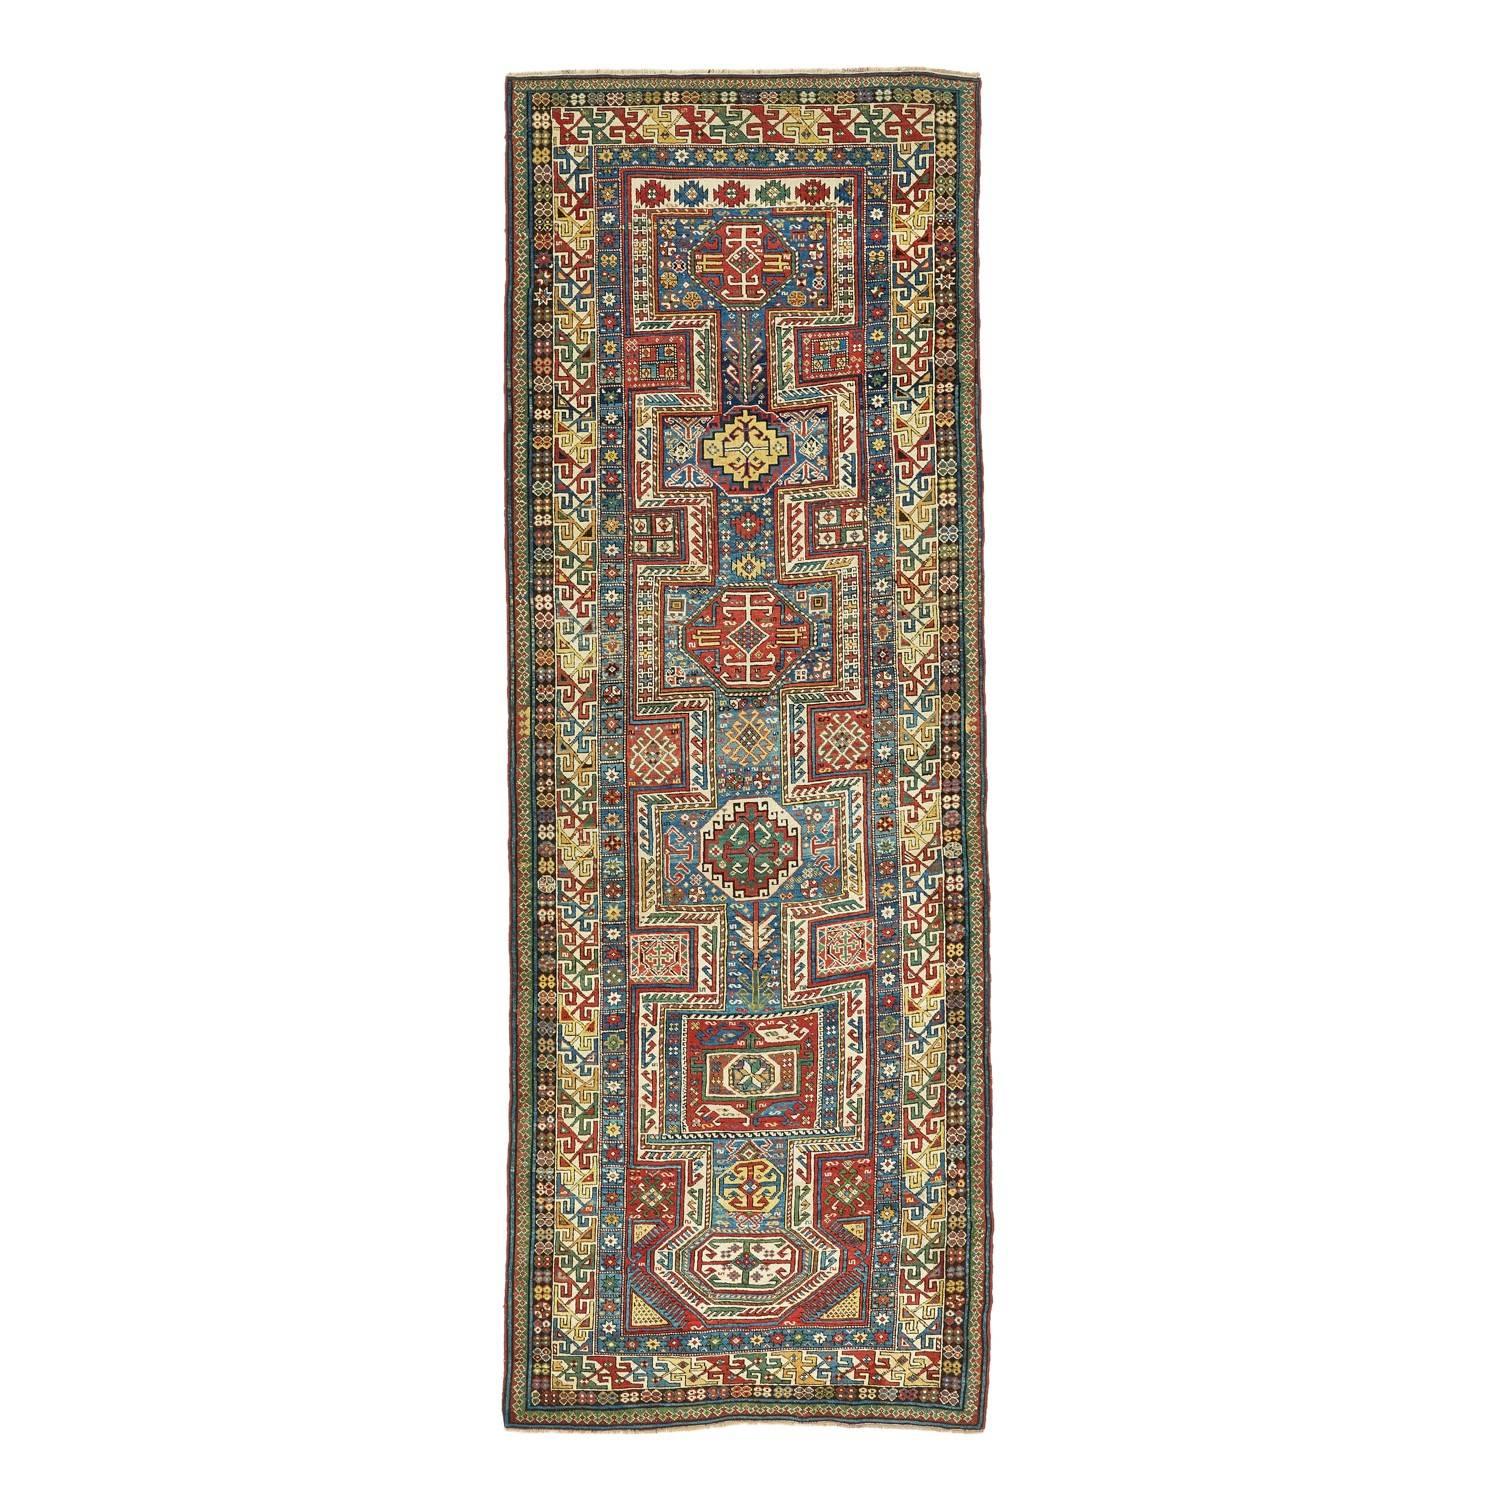 Handwoven from lustrous handspun wool, this antique Shirvan carpet features the simple, dense design elements that distinguish this style of weaving. Weavers often relied on primary vegetable dye palettes of indigo, madder, saffron and ivory to